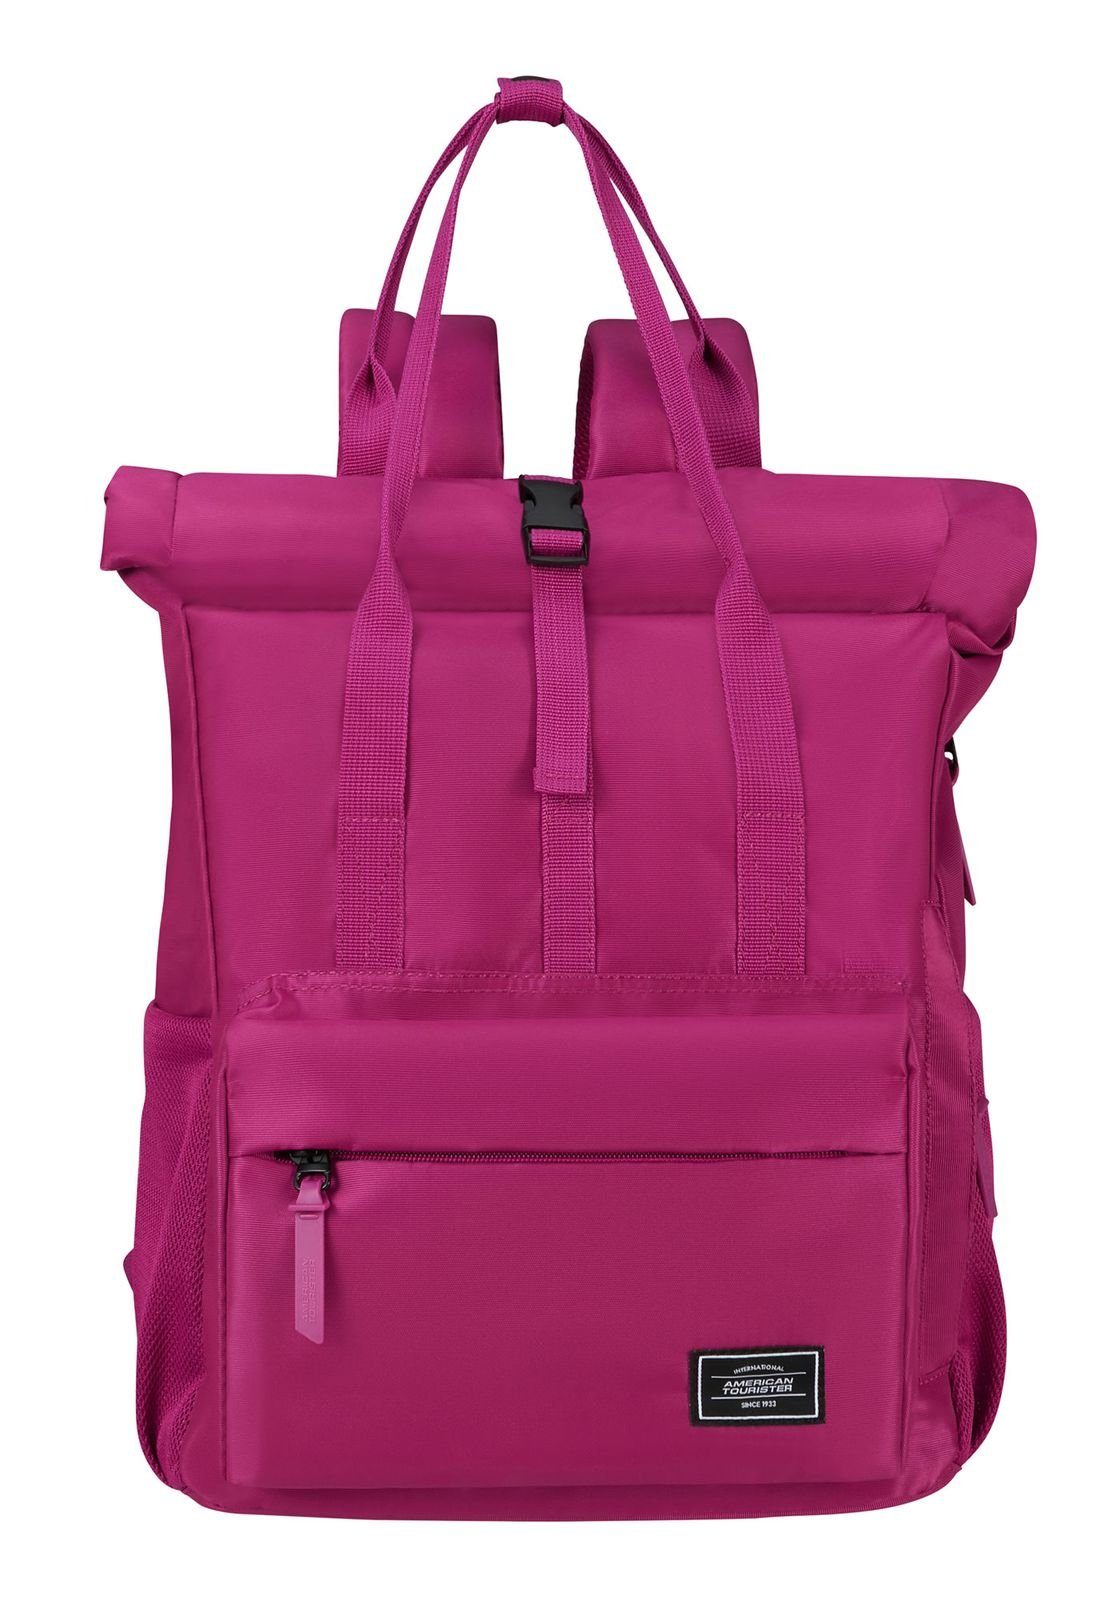 American Tourister® Rucksack Urban Groove Deep Orchid